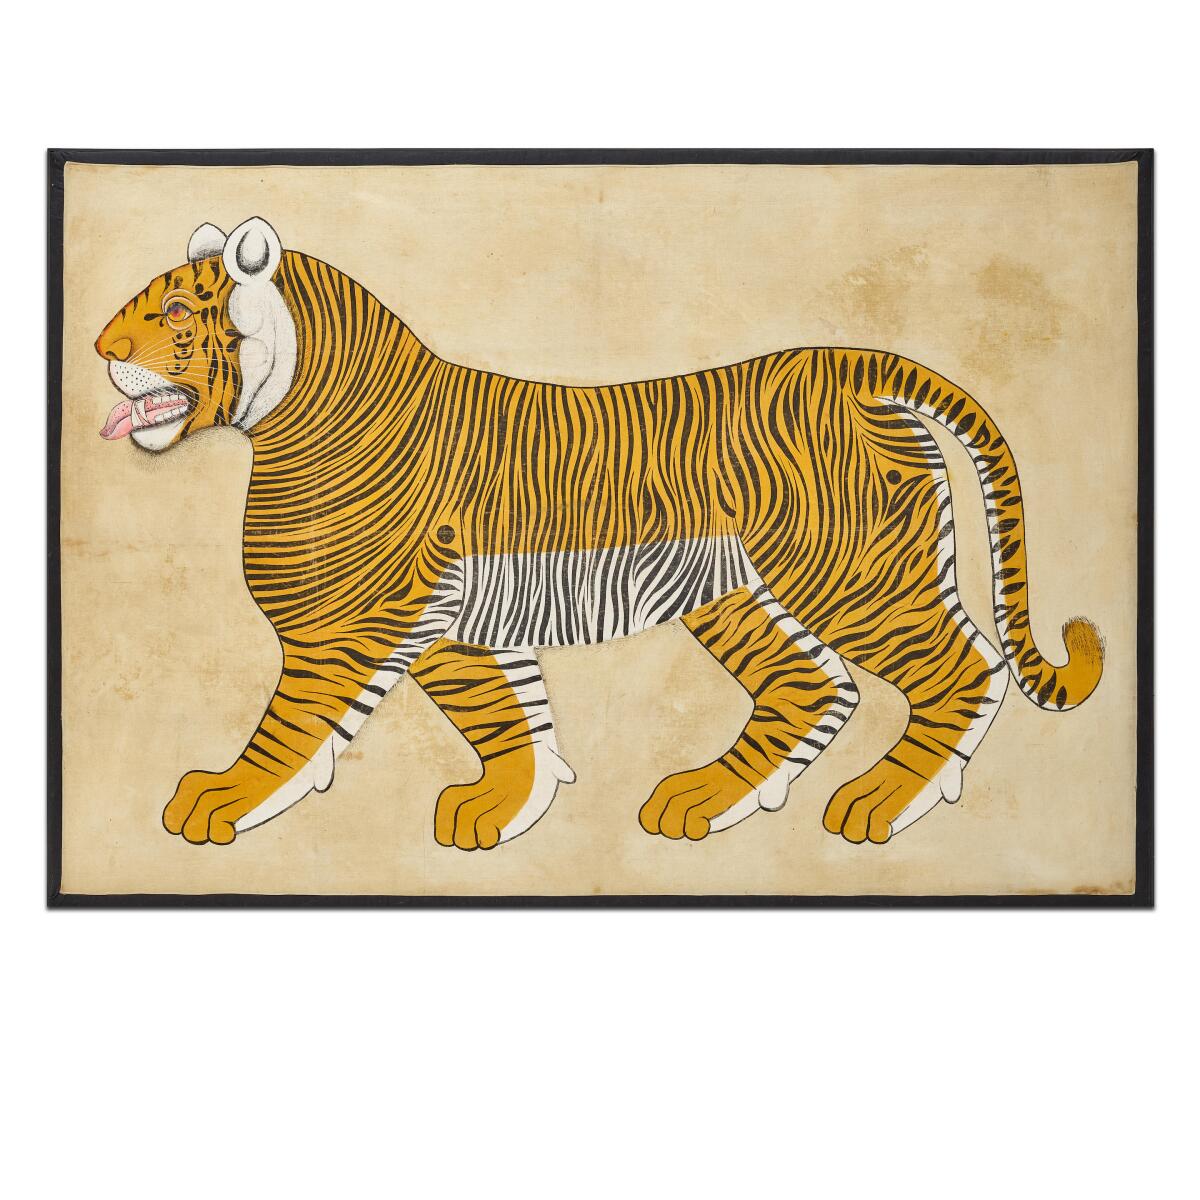 A painting of a tiger shown in profile.